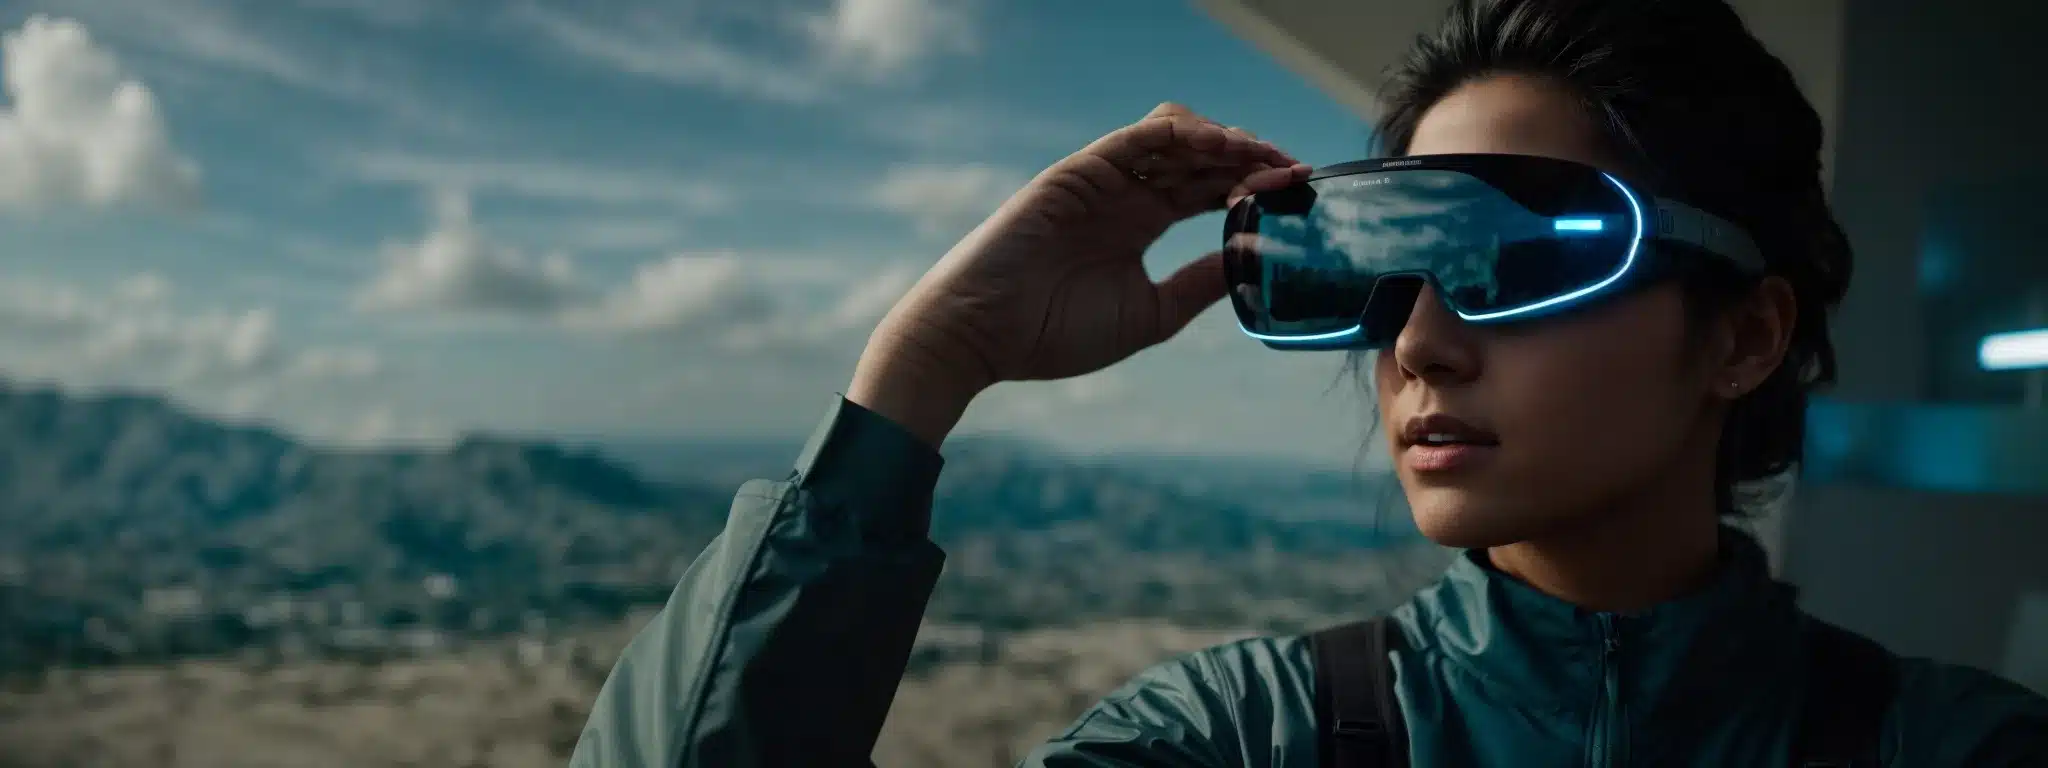 A Person Experiencing A Virtual Landscape With Futuristic Smart Glasses Against A Tech-Inspired Backdrop.